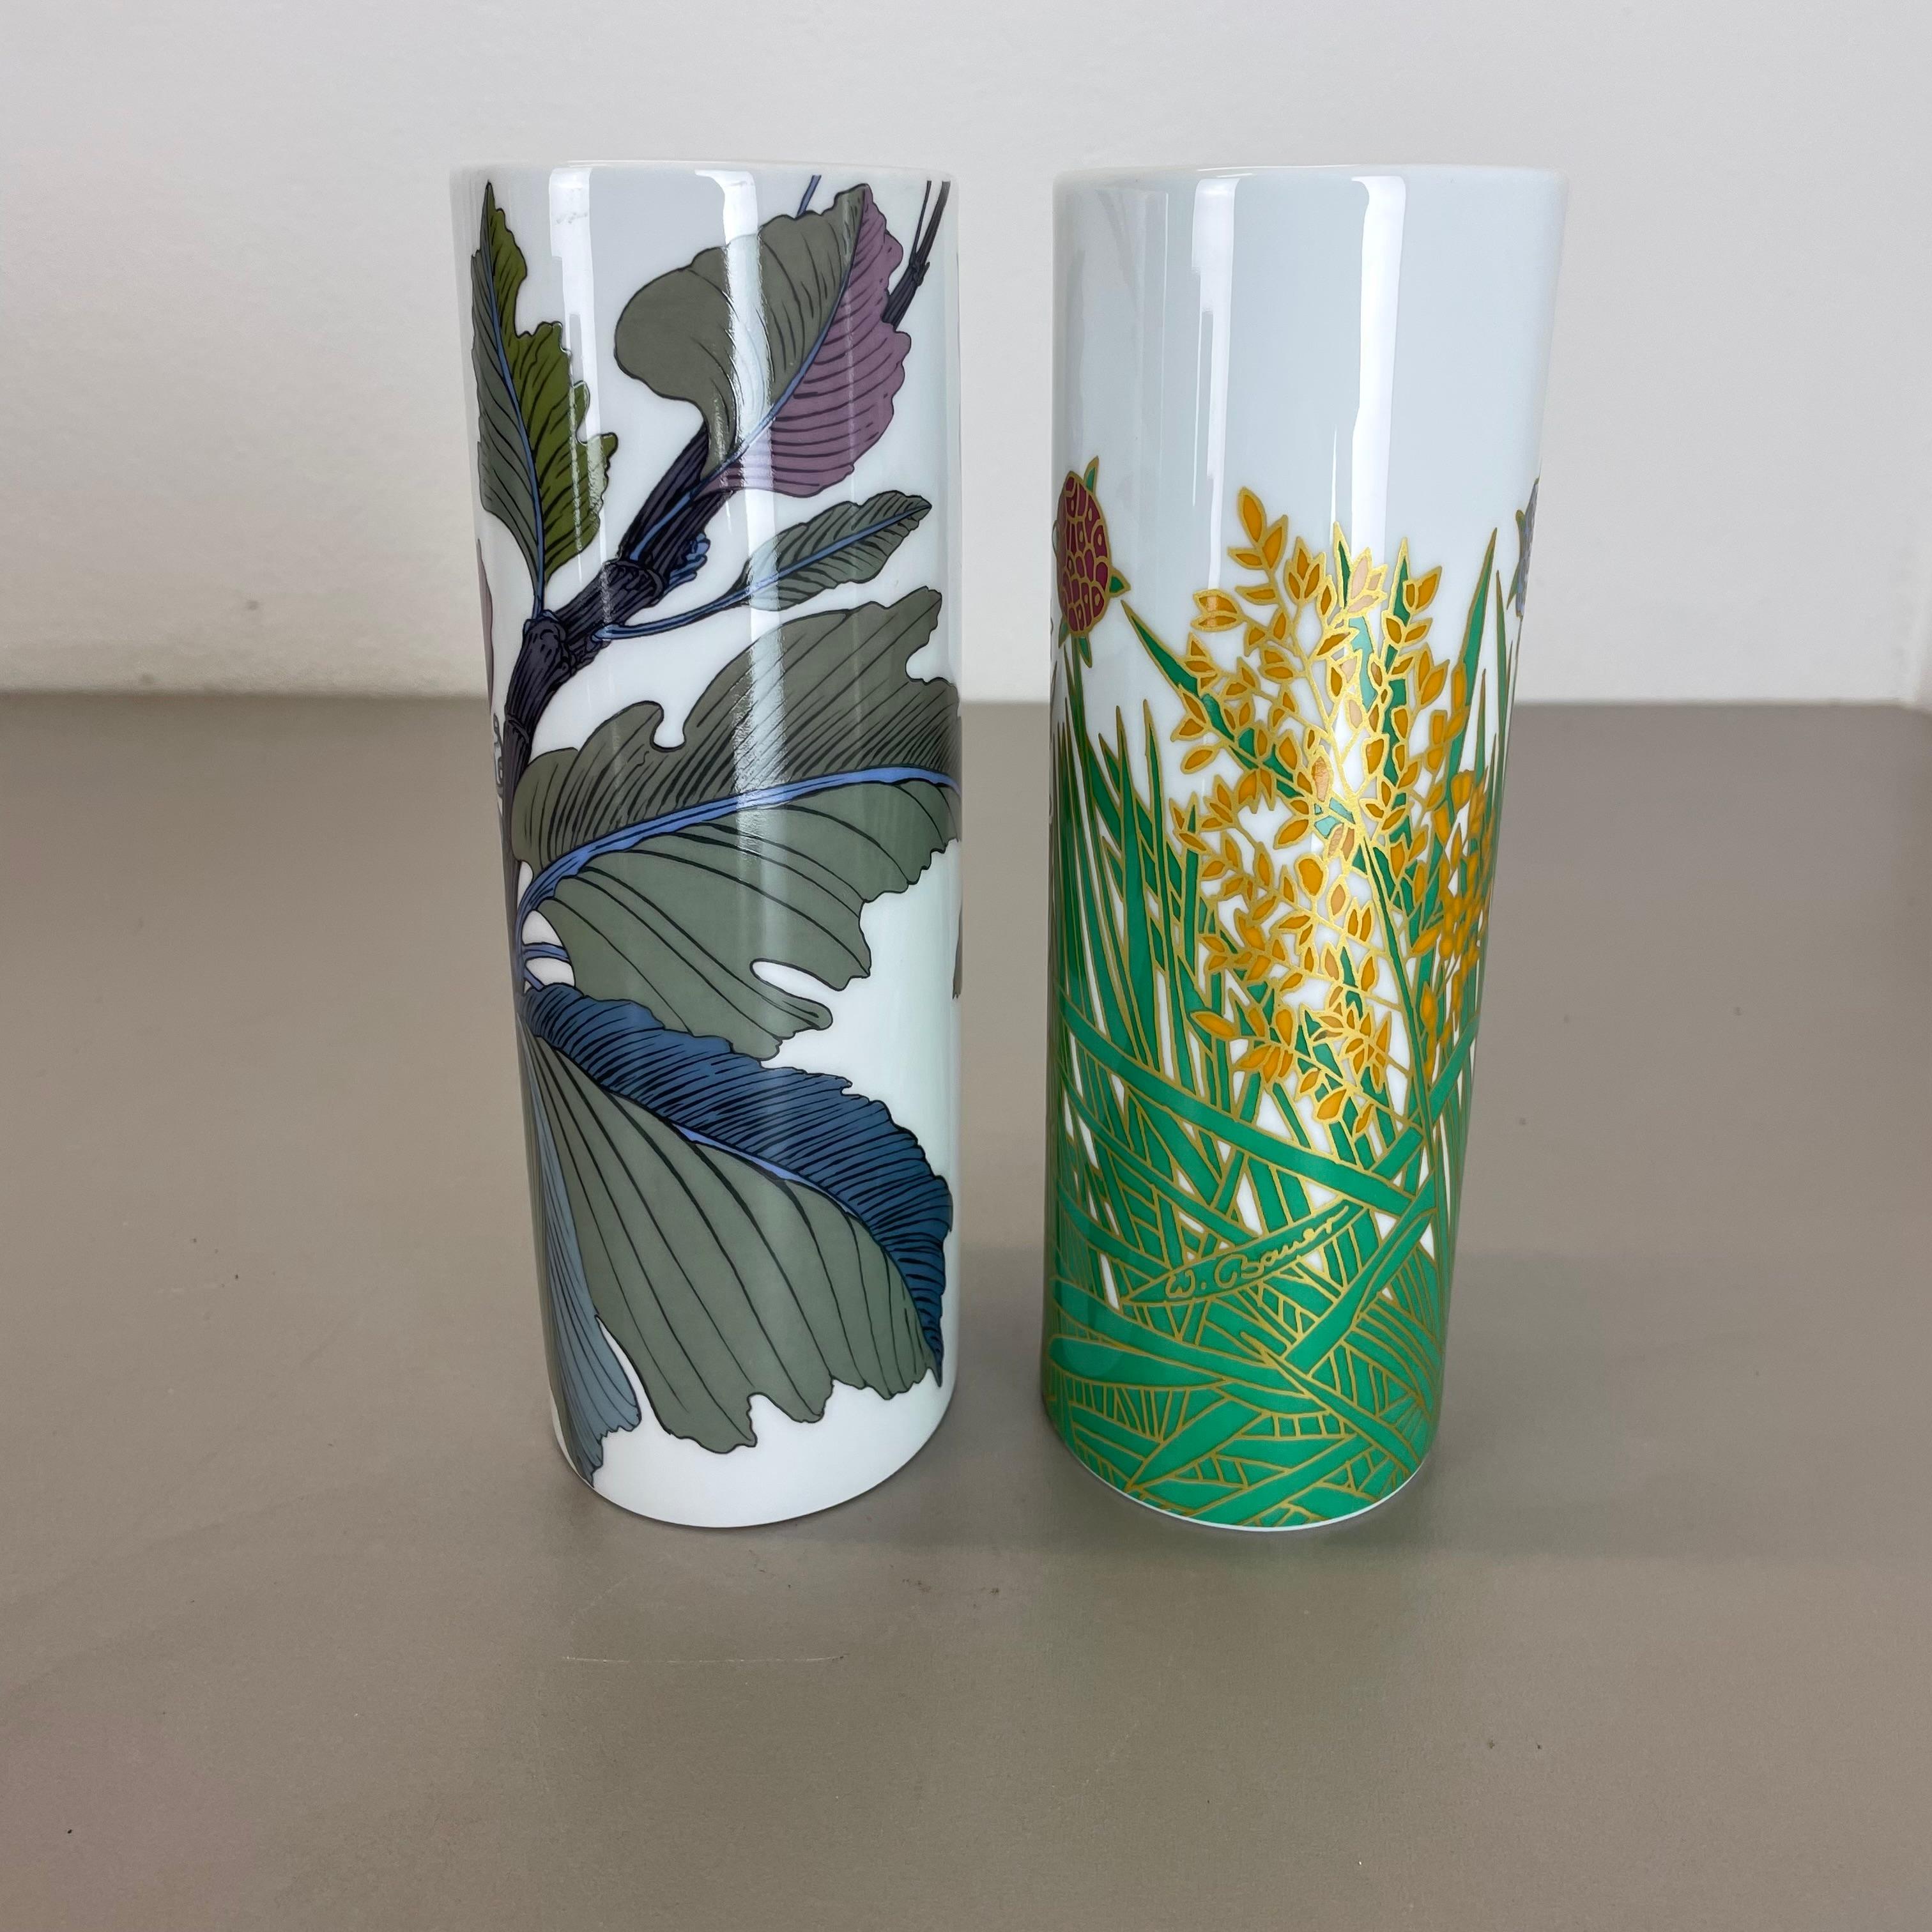 Set of 2 Floral Vases by W. Bauer and A. Le Foll for Rosenthal, Germany, 1980s For Sale 5